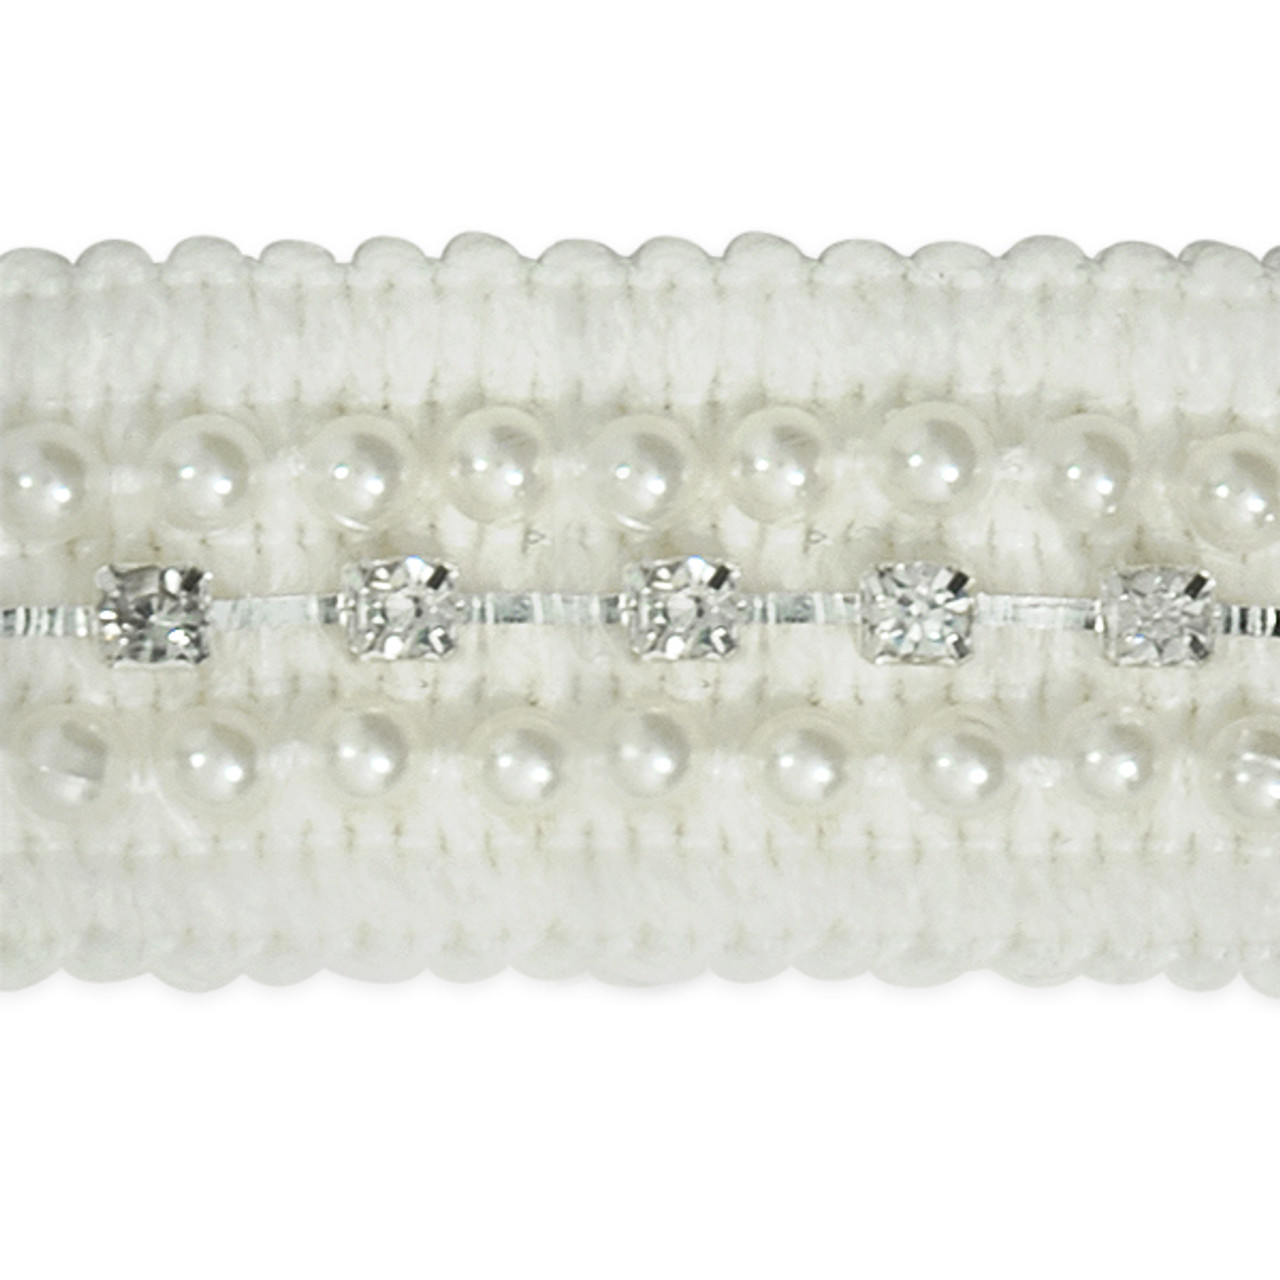 Rhinestone Trim With 4mm Pearl - Pearl (Sold by the Yard)